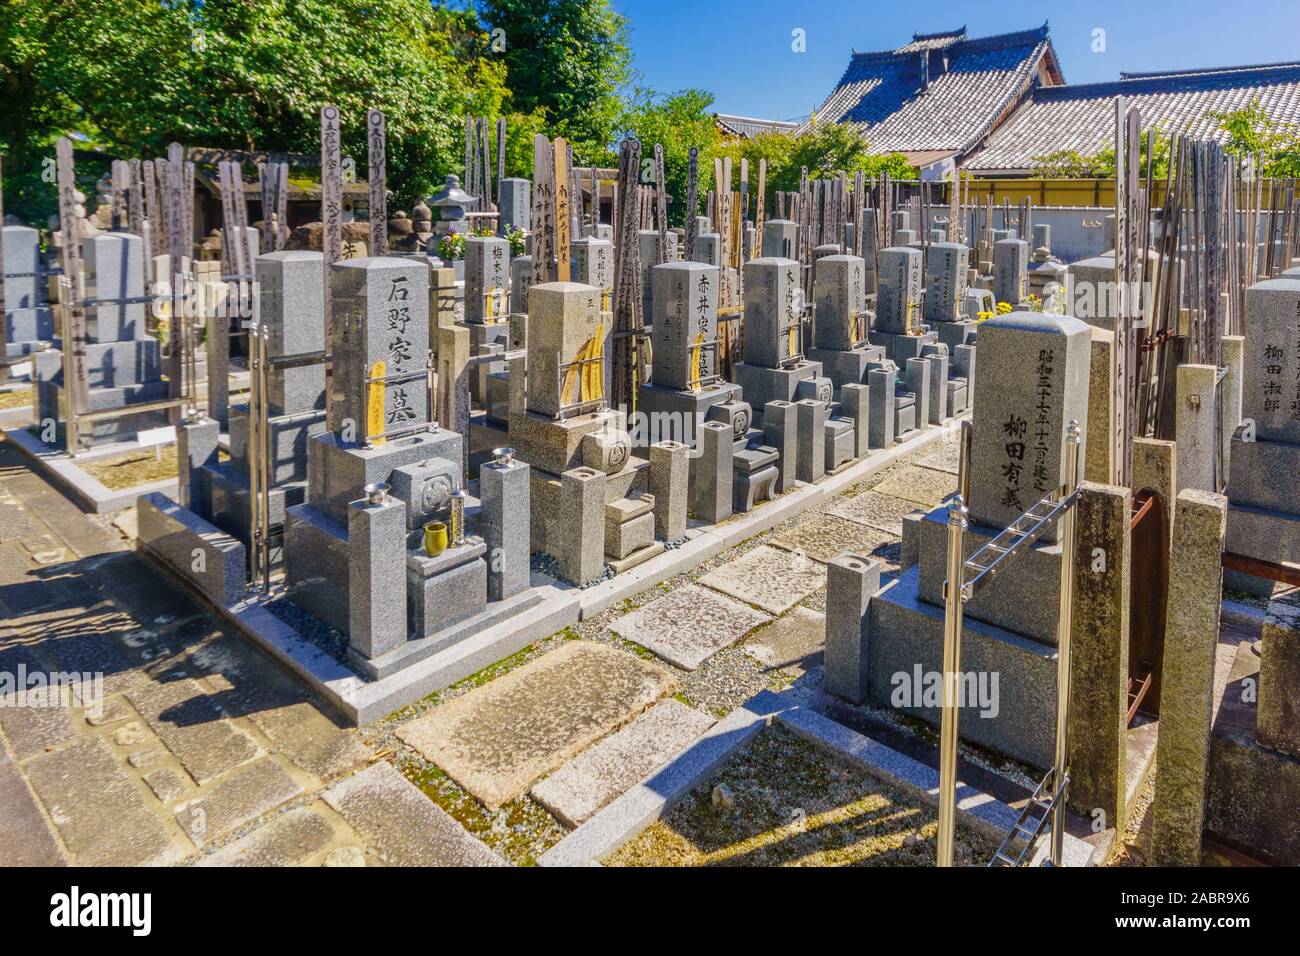 Kyoto, Japan - October 9, 2019: View of the cemetery of the Taizo-in Temple, in Kyoto, Japan Stock Photo